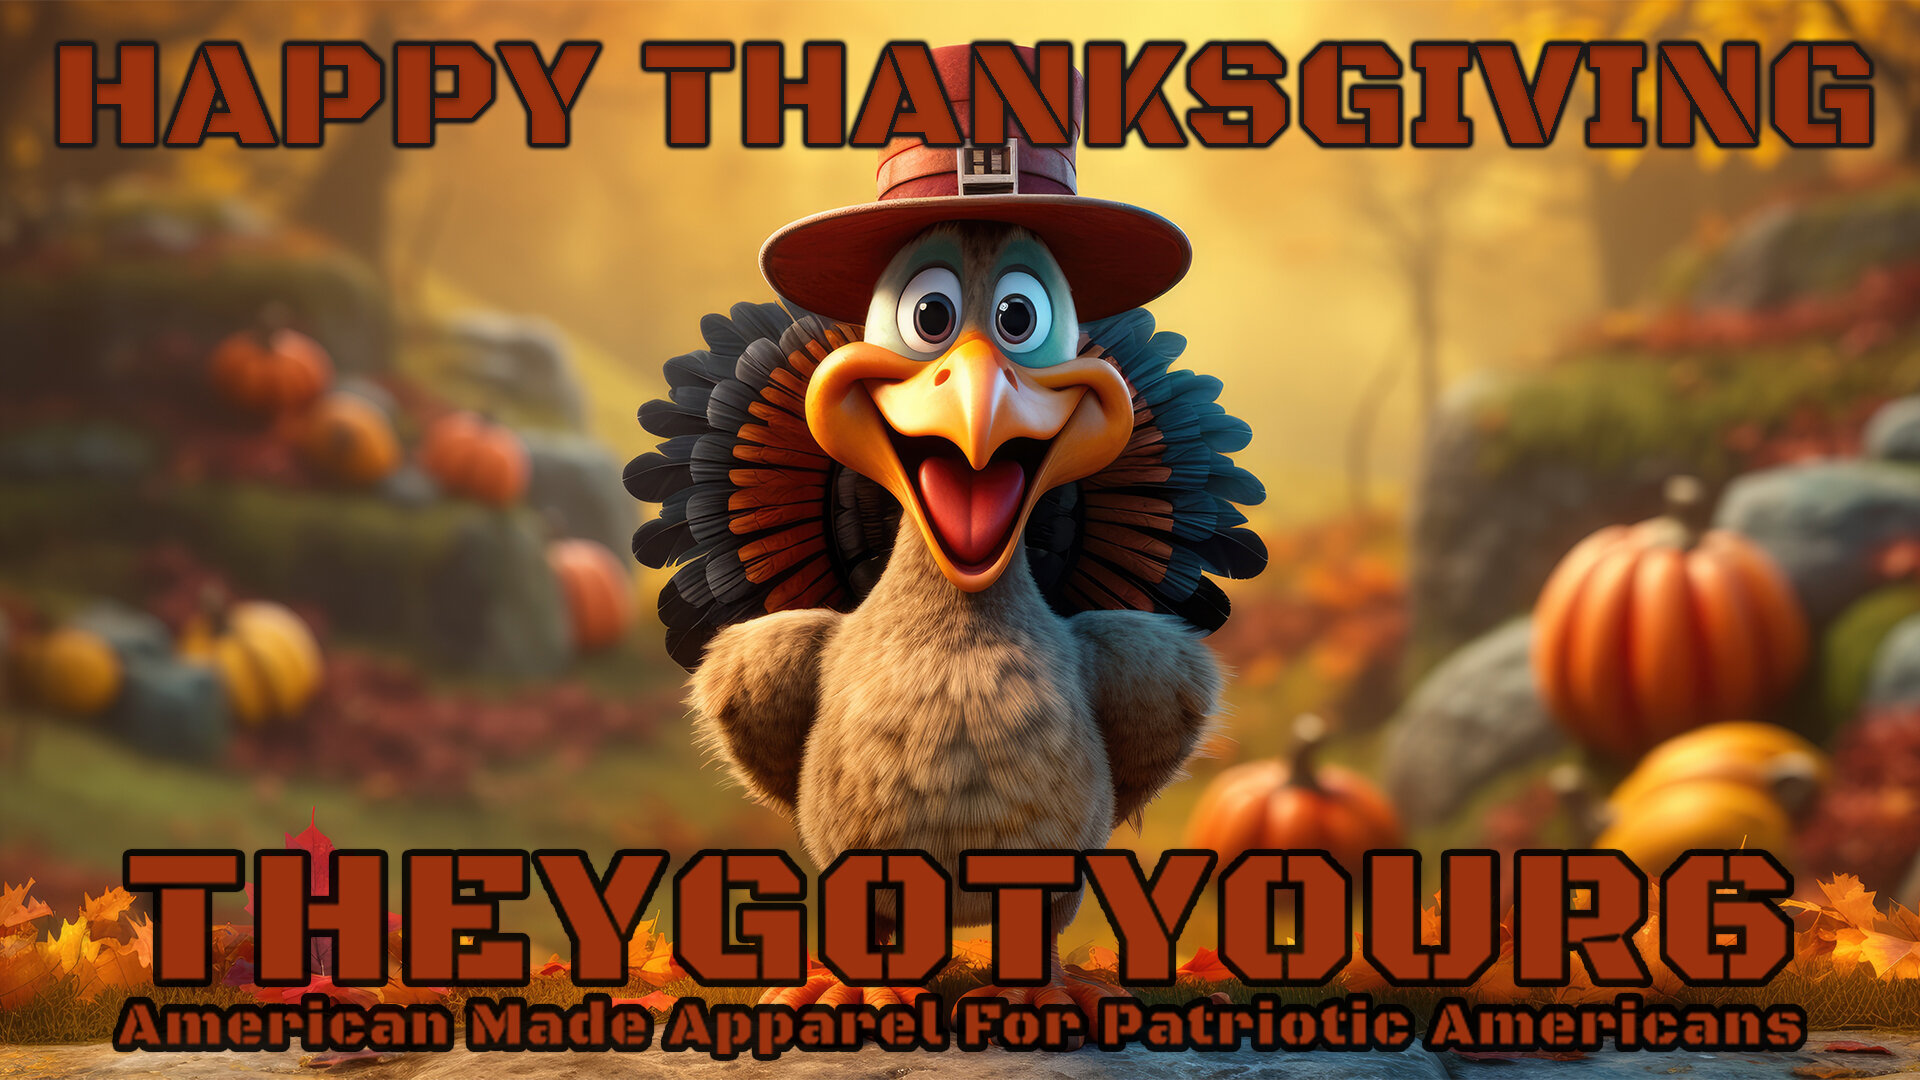 From all of us to all of you, we wish you a Happy Thanksgiving! Please remember all of our brave men and women serving around the world, and here in our communities away from their loved ones. We see you and appreciate the sacrifices you make for us!